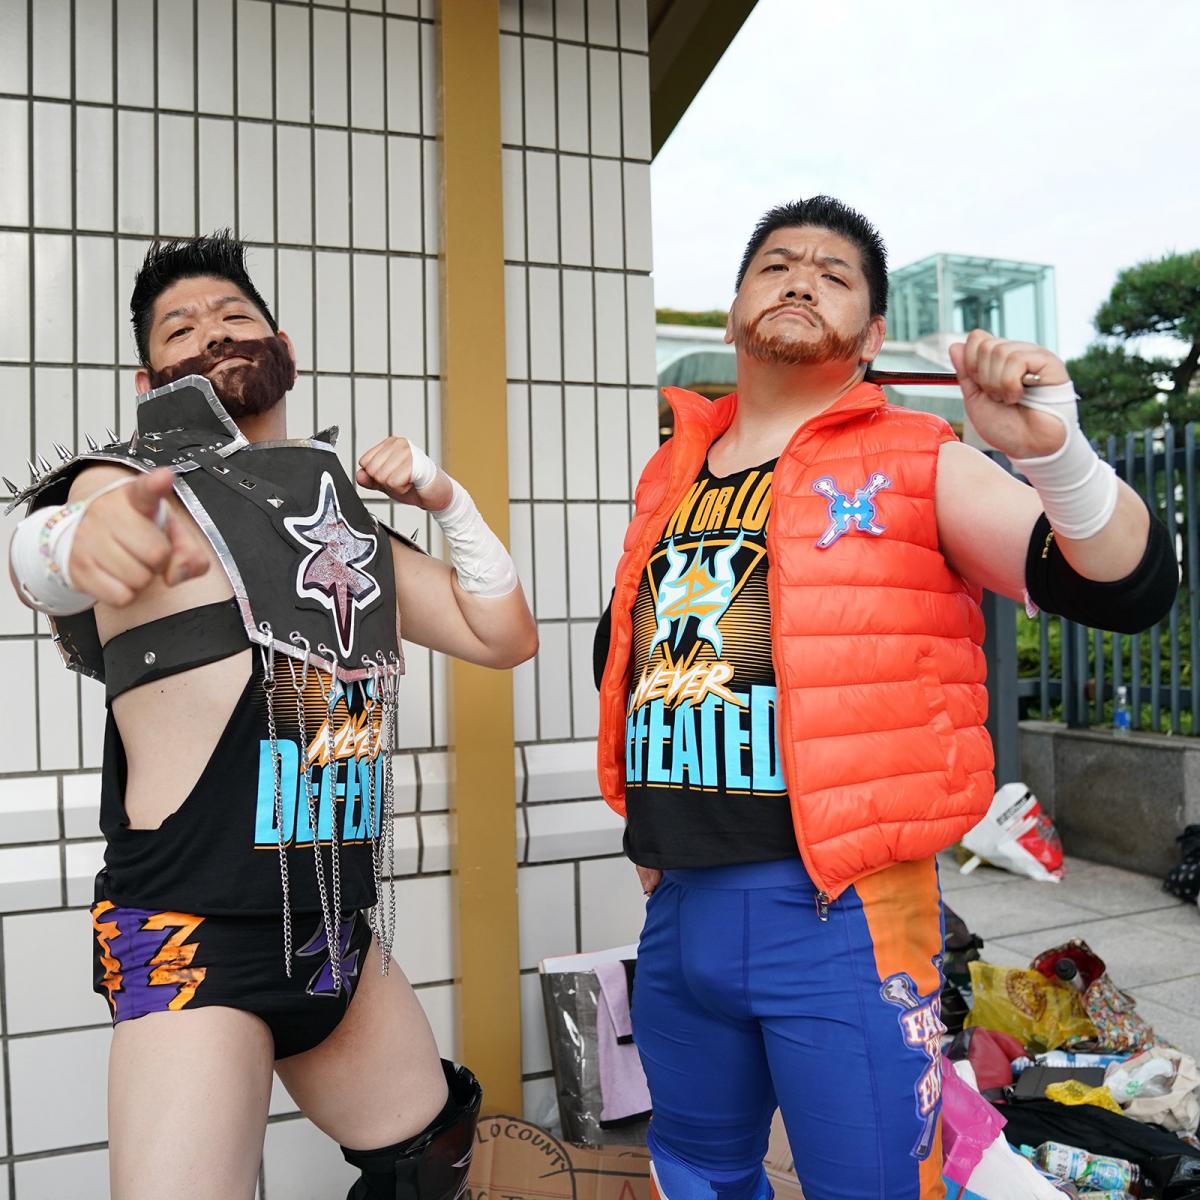 WWEInspired Cosplay Invades Japan's Tokyo (Photos)